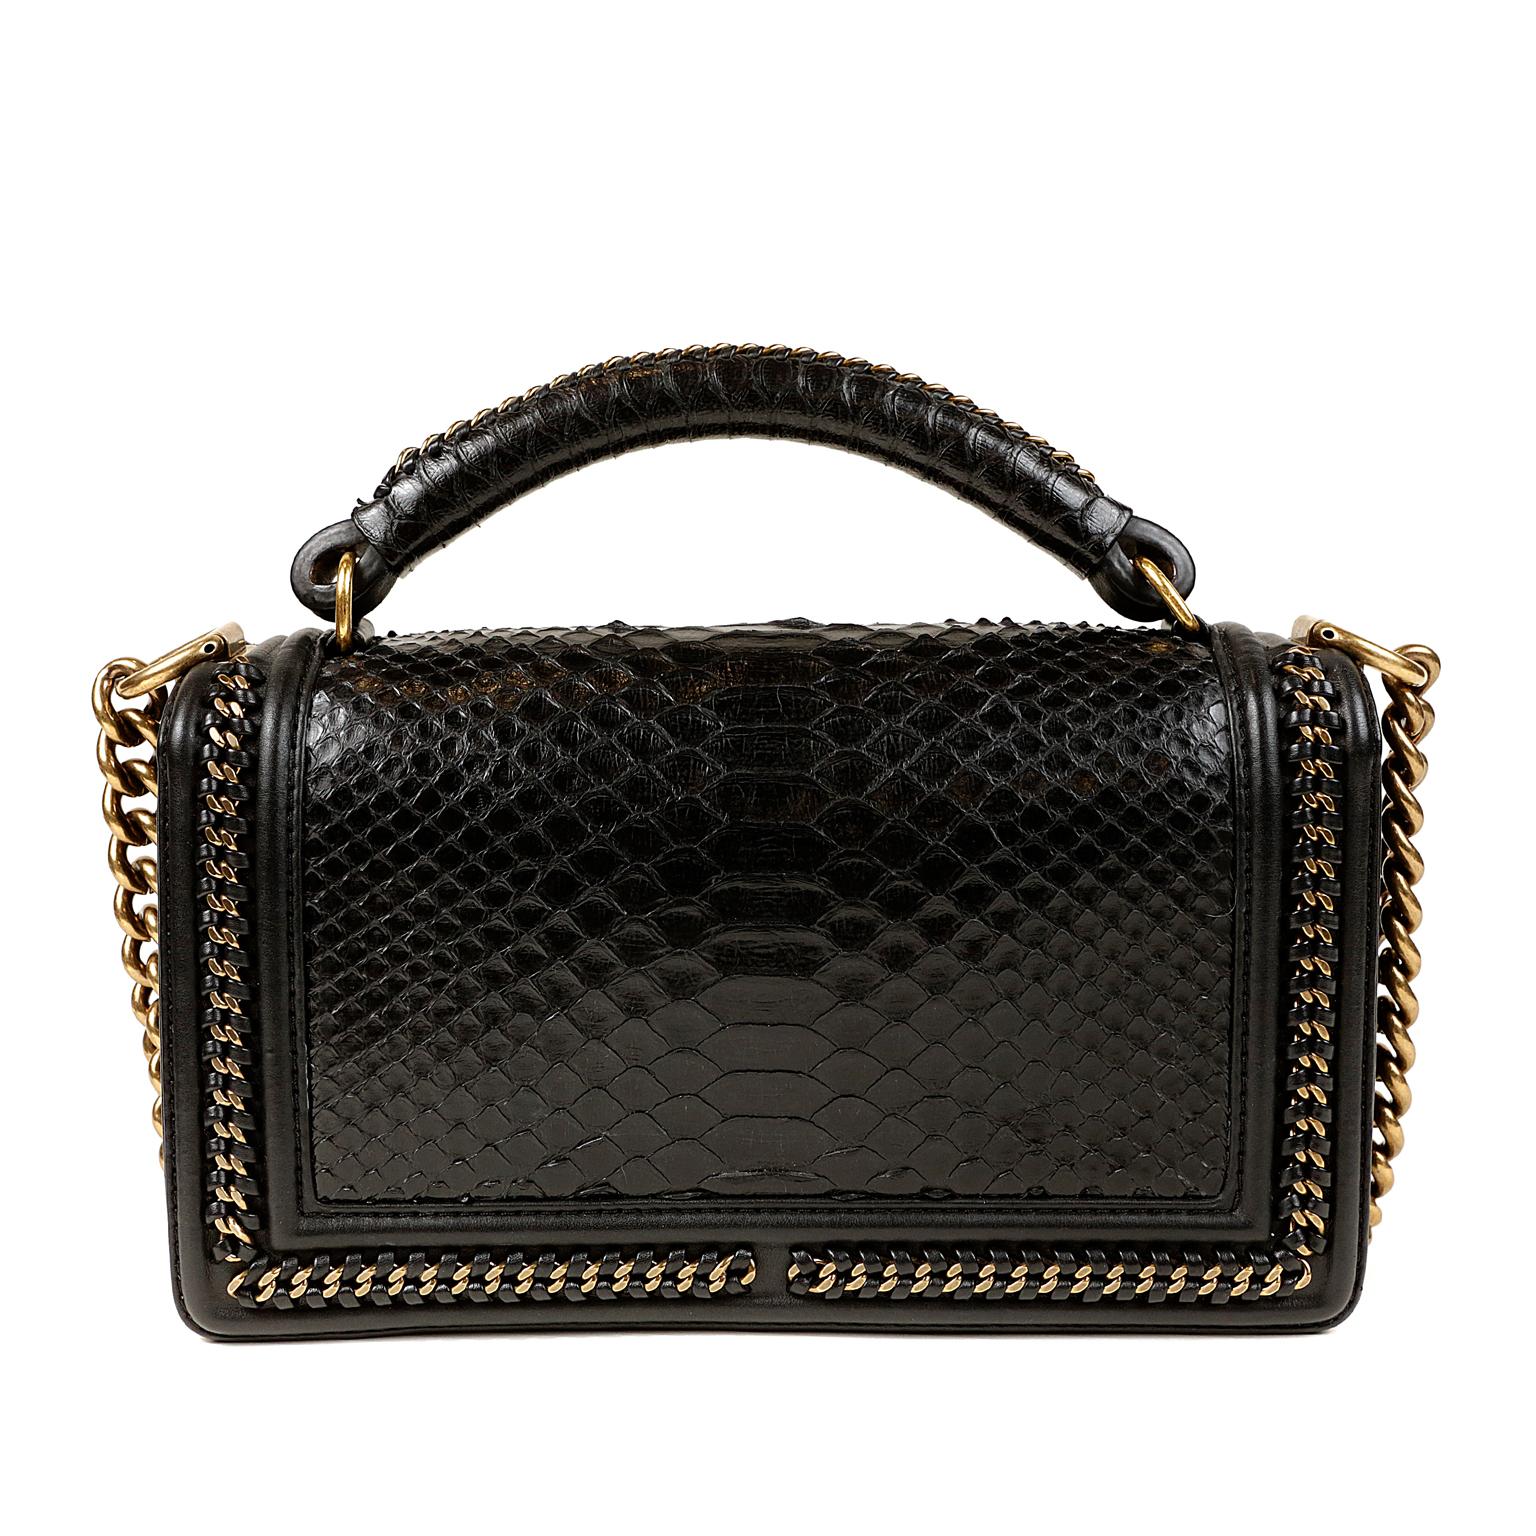 Chanel Black Python Medium Boy Bag - Pristine; appears never carried.     The updated design is structured and edgy with a versatility that makes it extremely popular.  Exotic python, antiqued gold hardware and intricate details elevate this Boy Bag